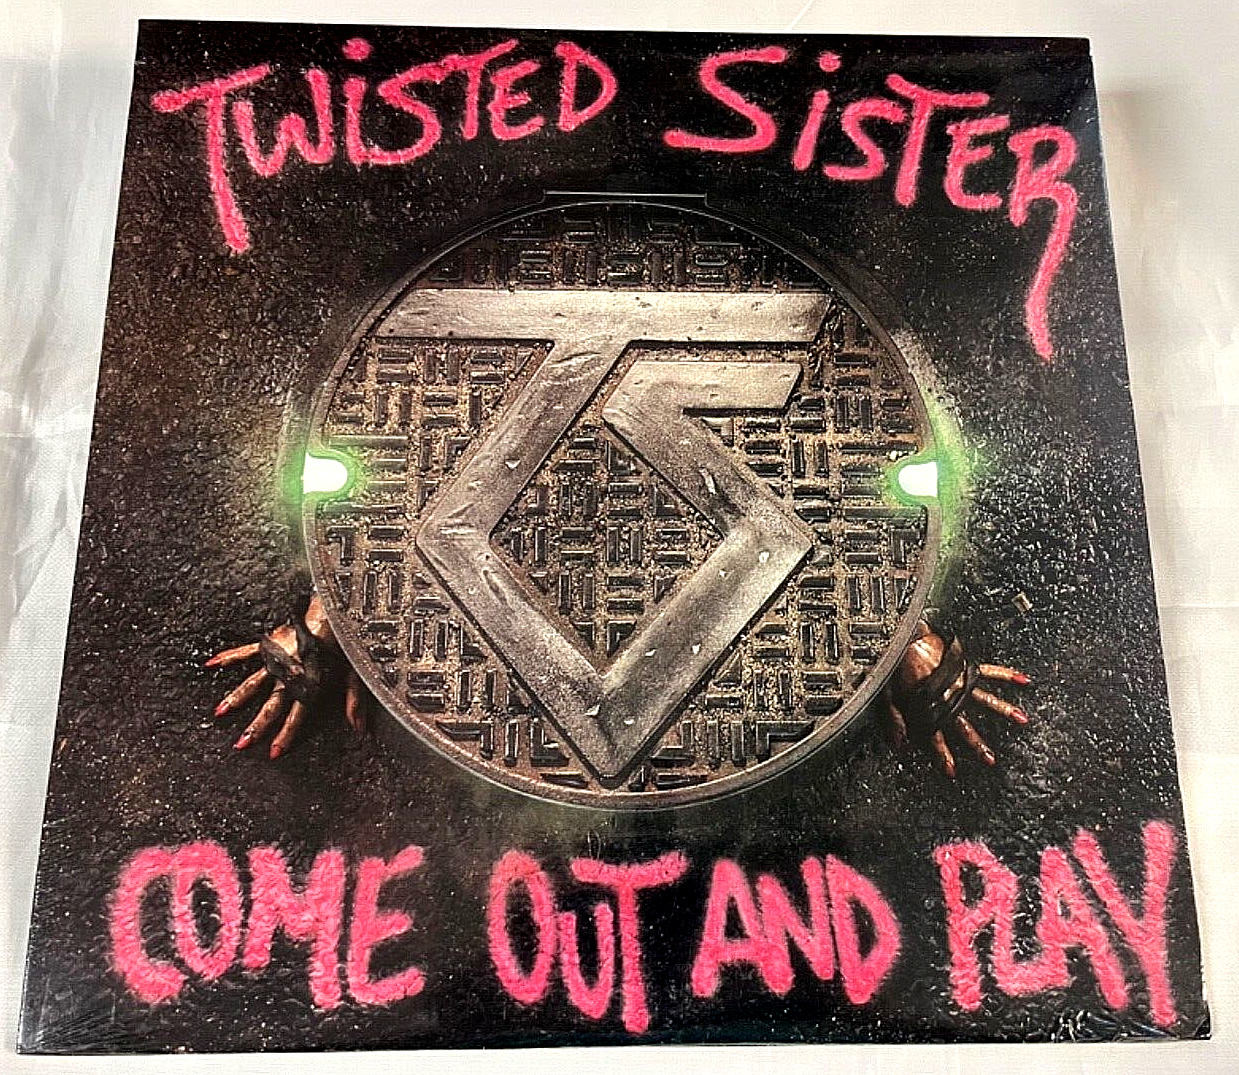 Twisted Sister "Come Out To Play" LP 1985 Dee Snider Vinyl Reissue Sealed New